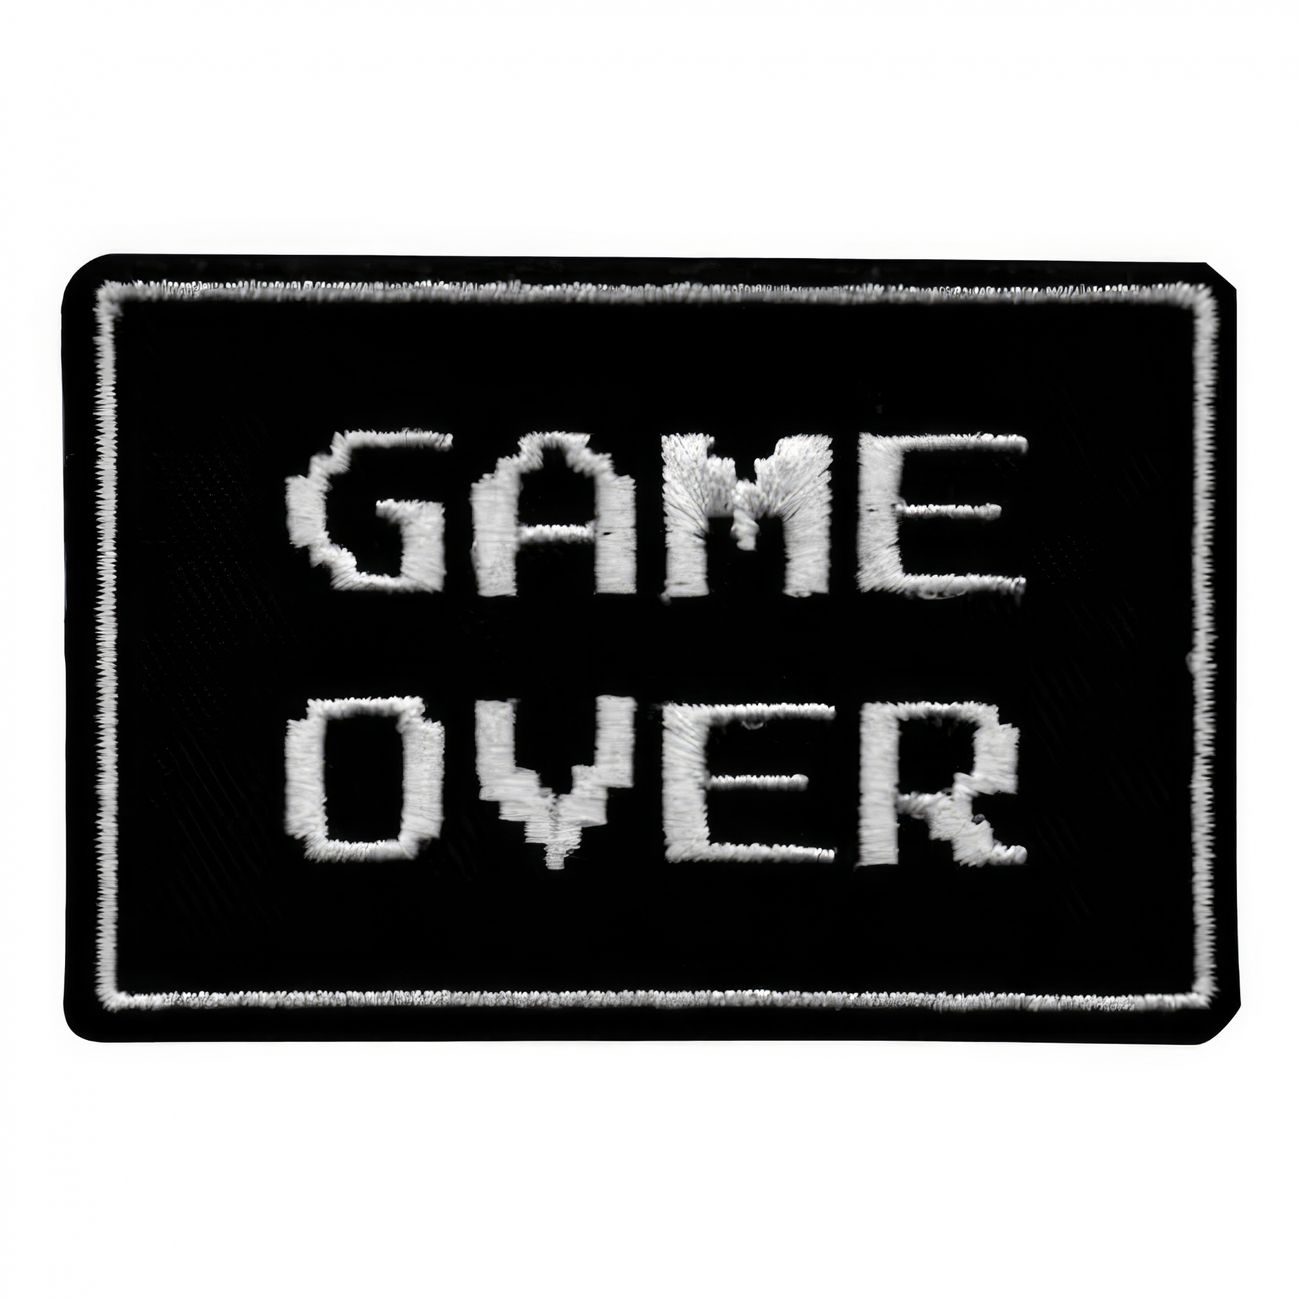 tygmarke-game-over-a-94198-1